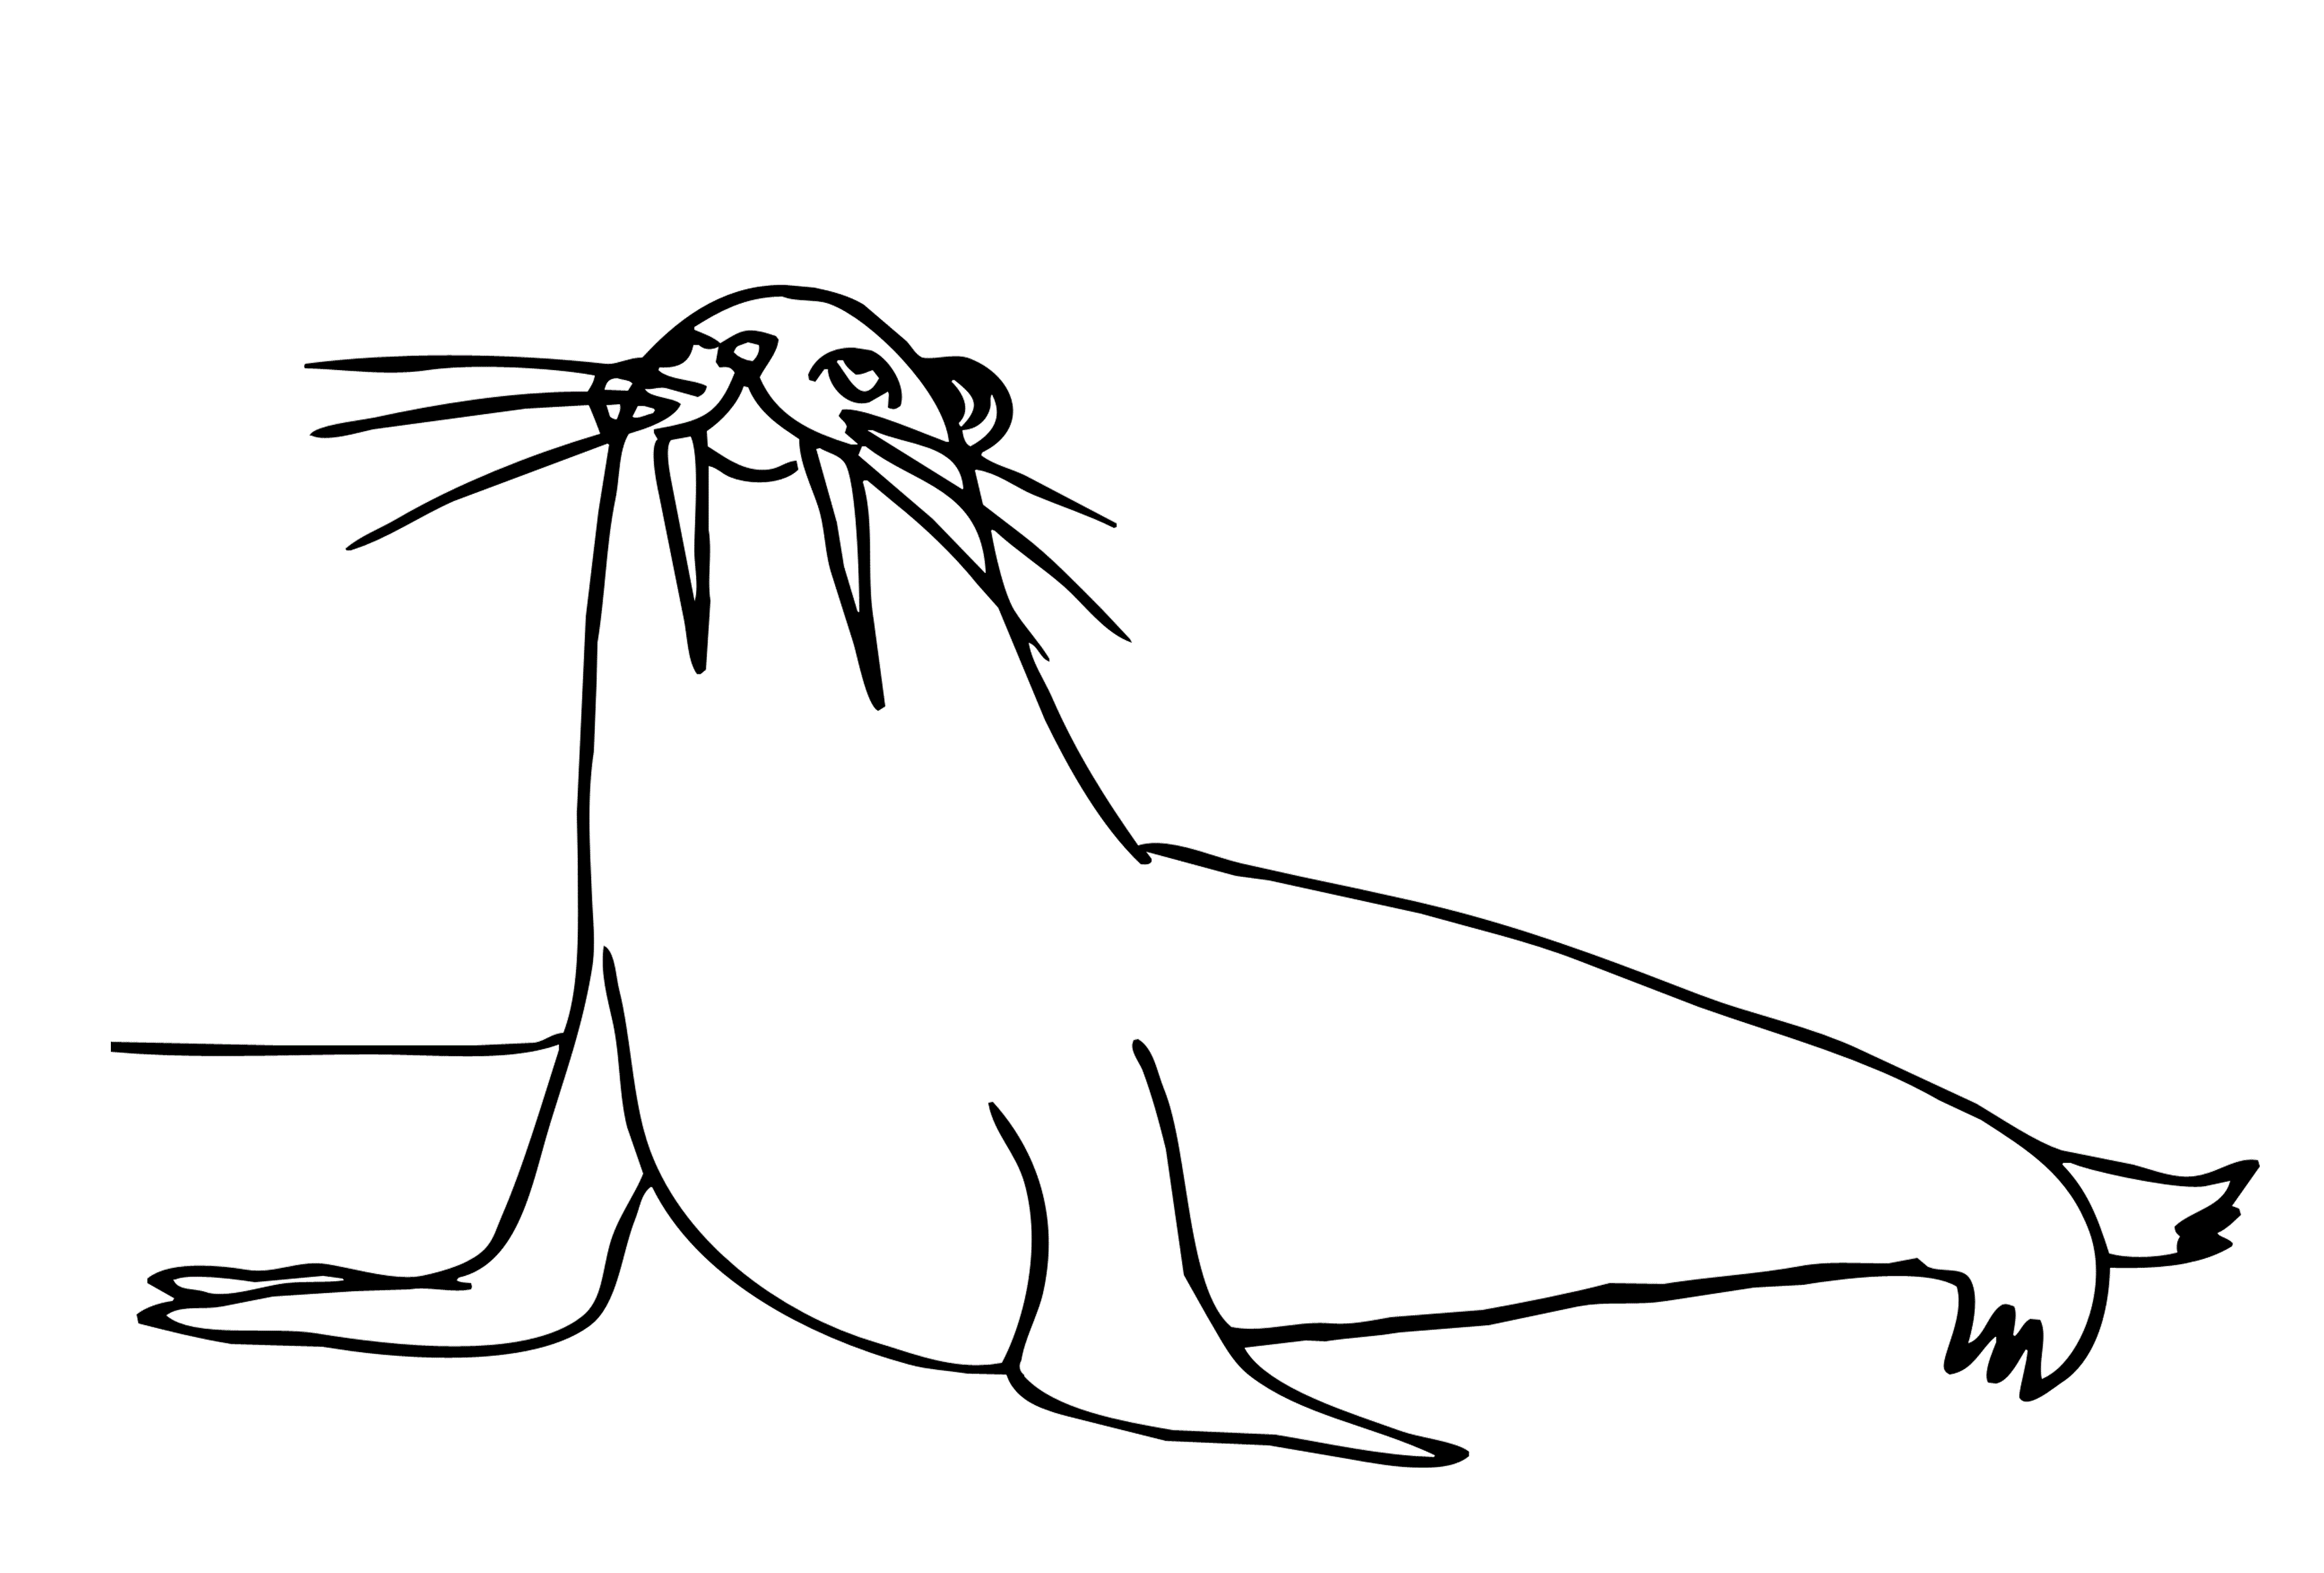 Download Walrus Coloring Pages to download and print for free